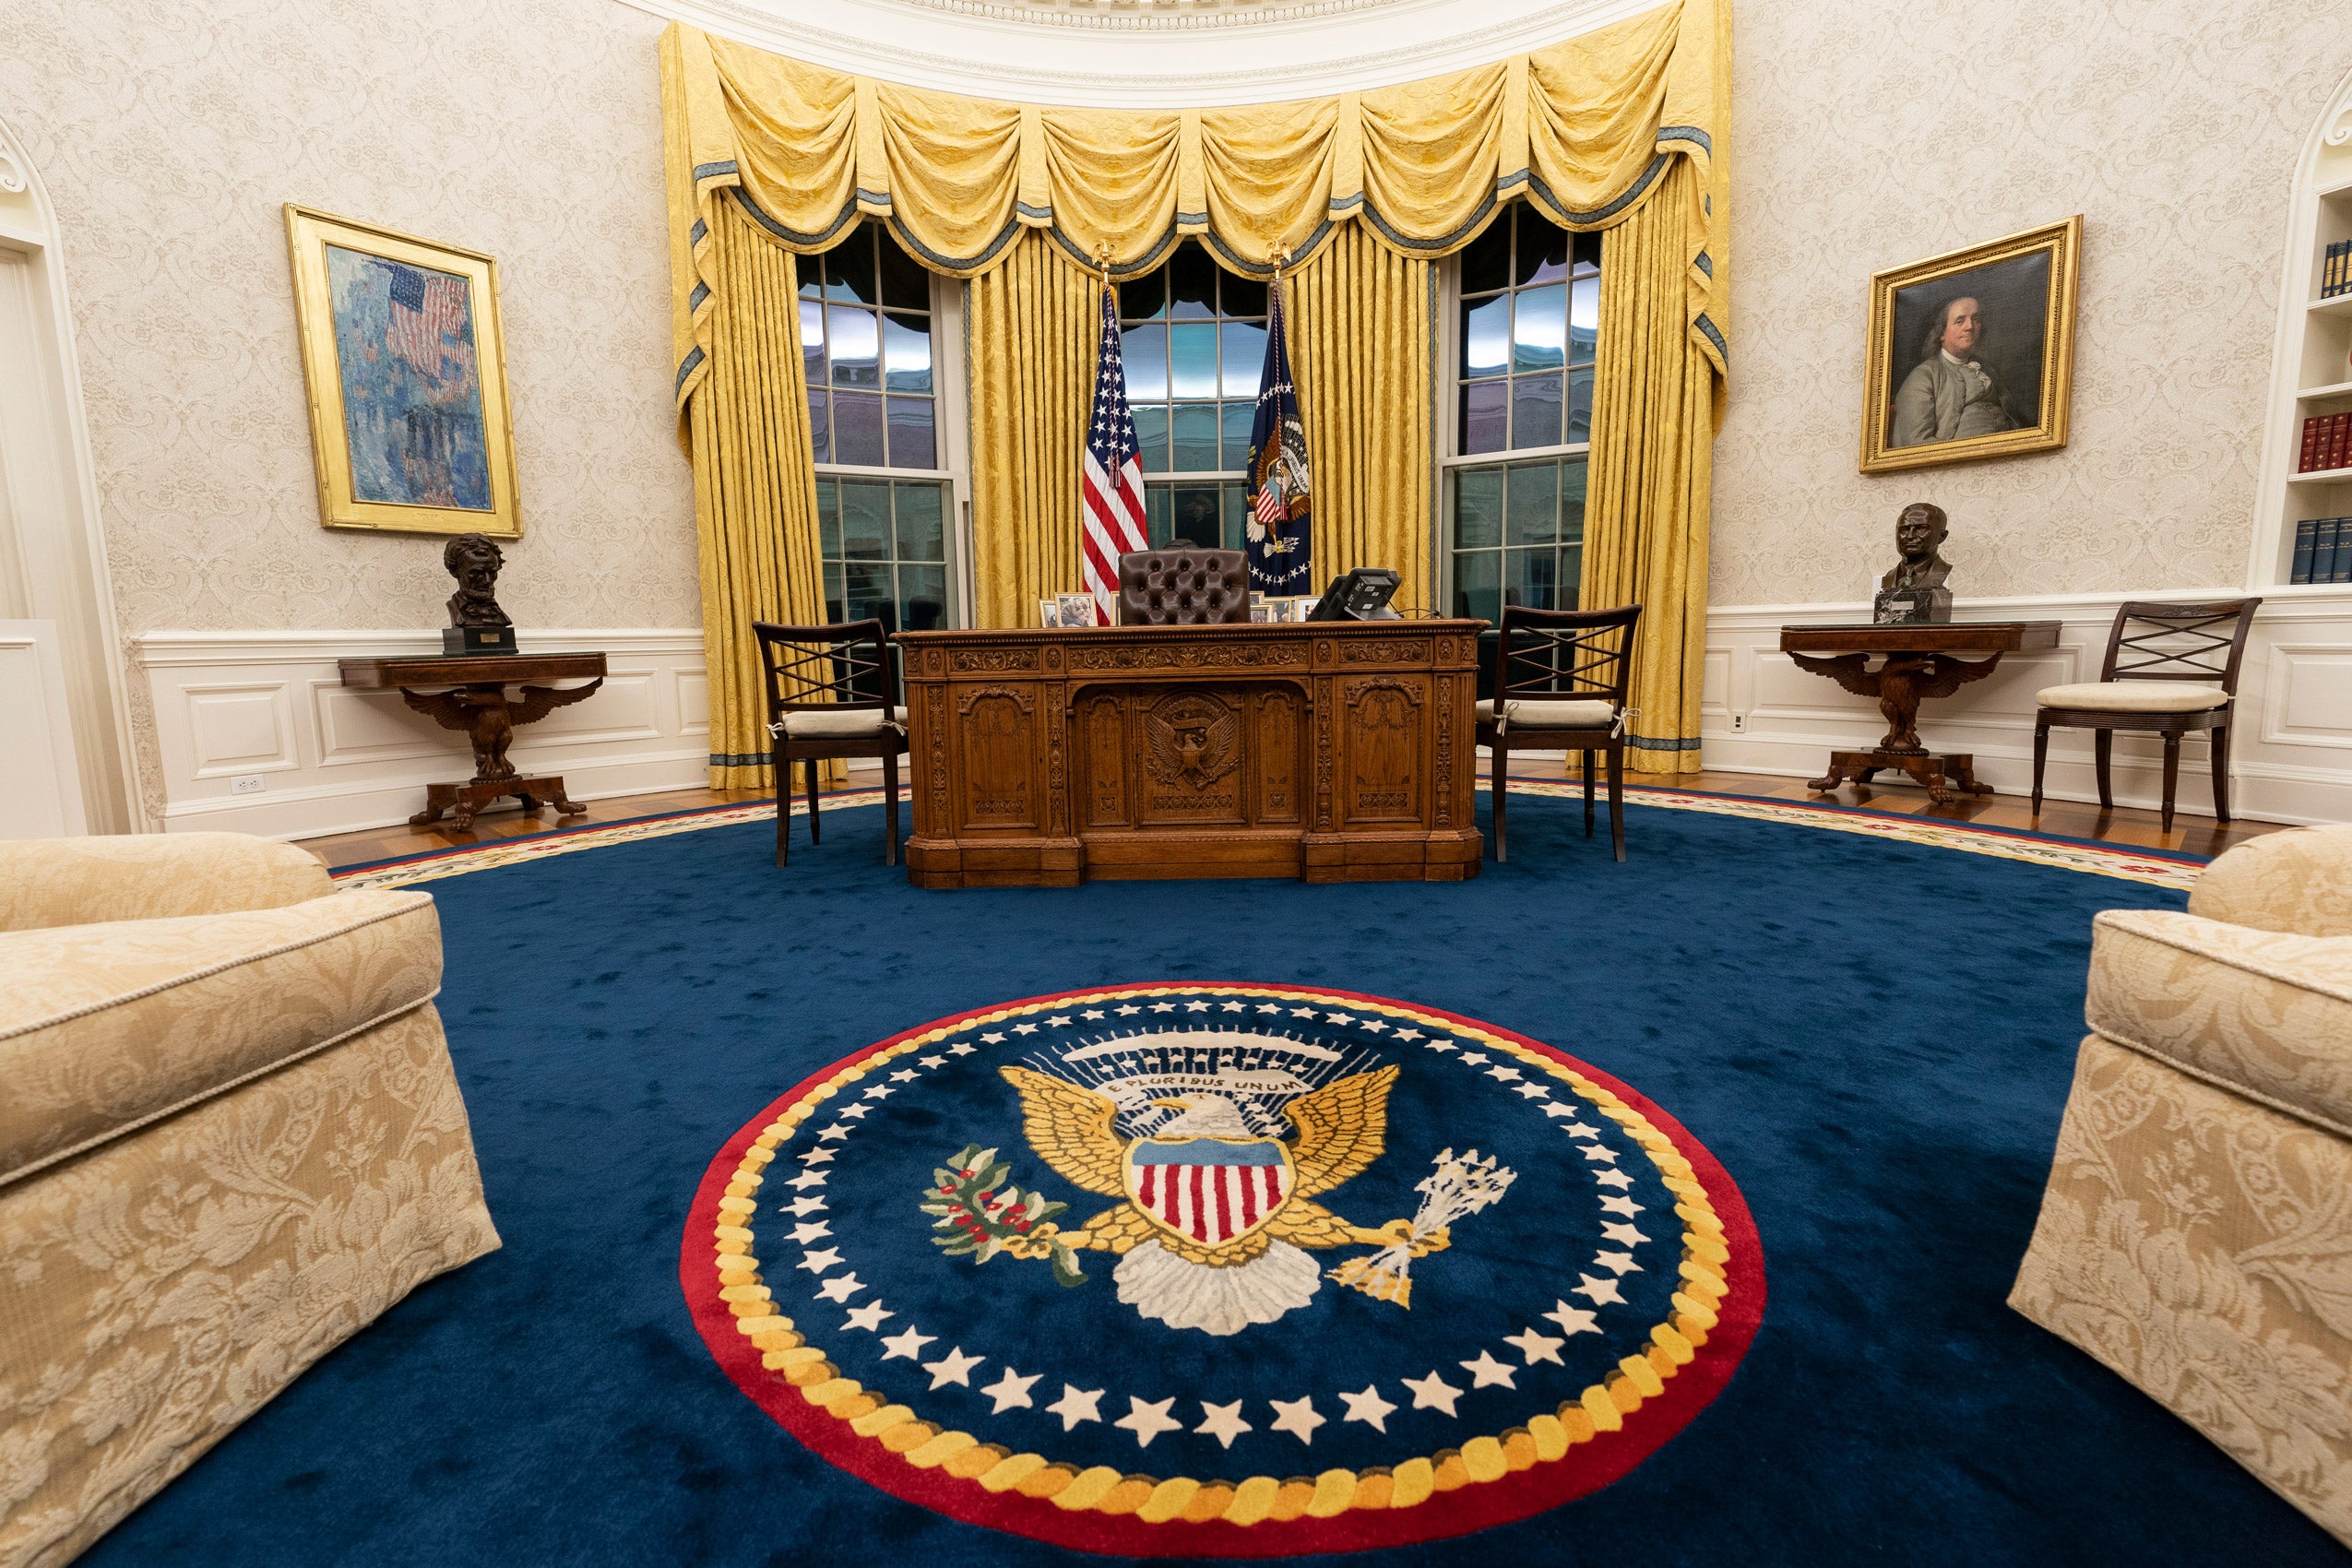 US president's oval office